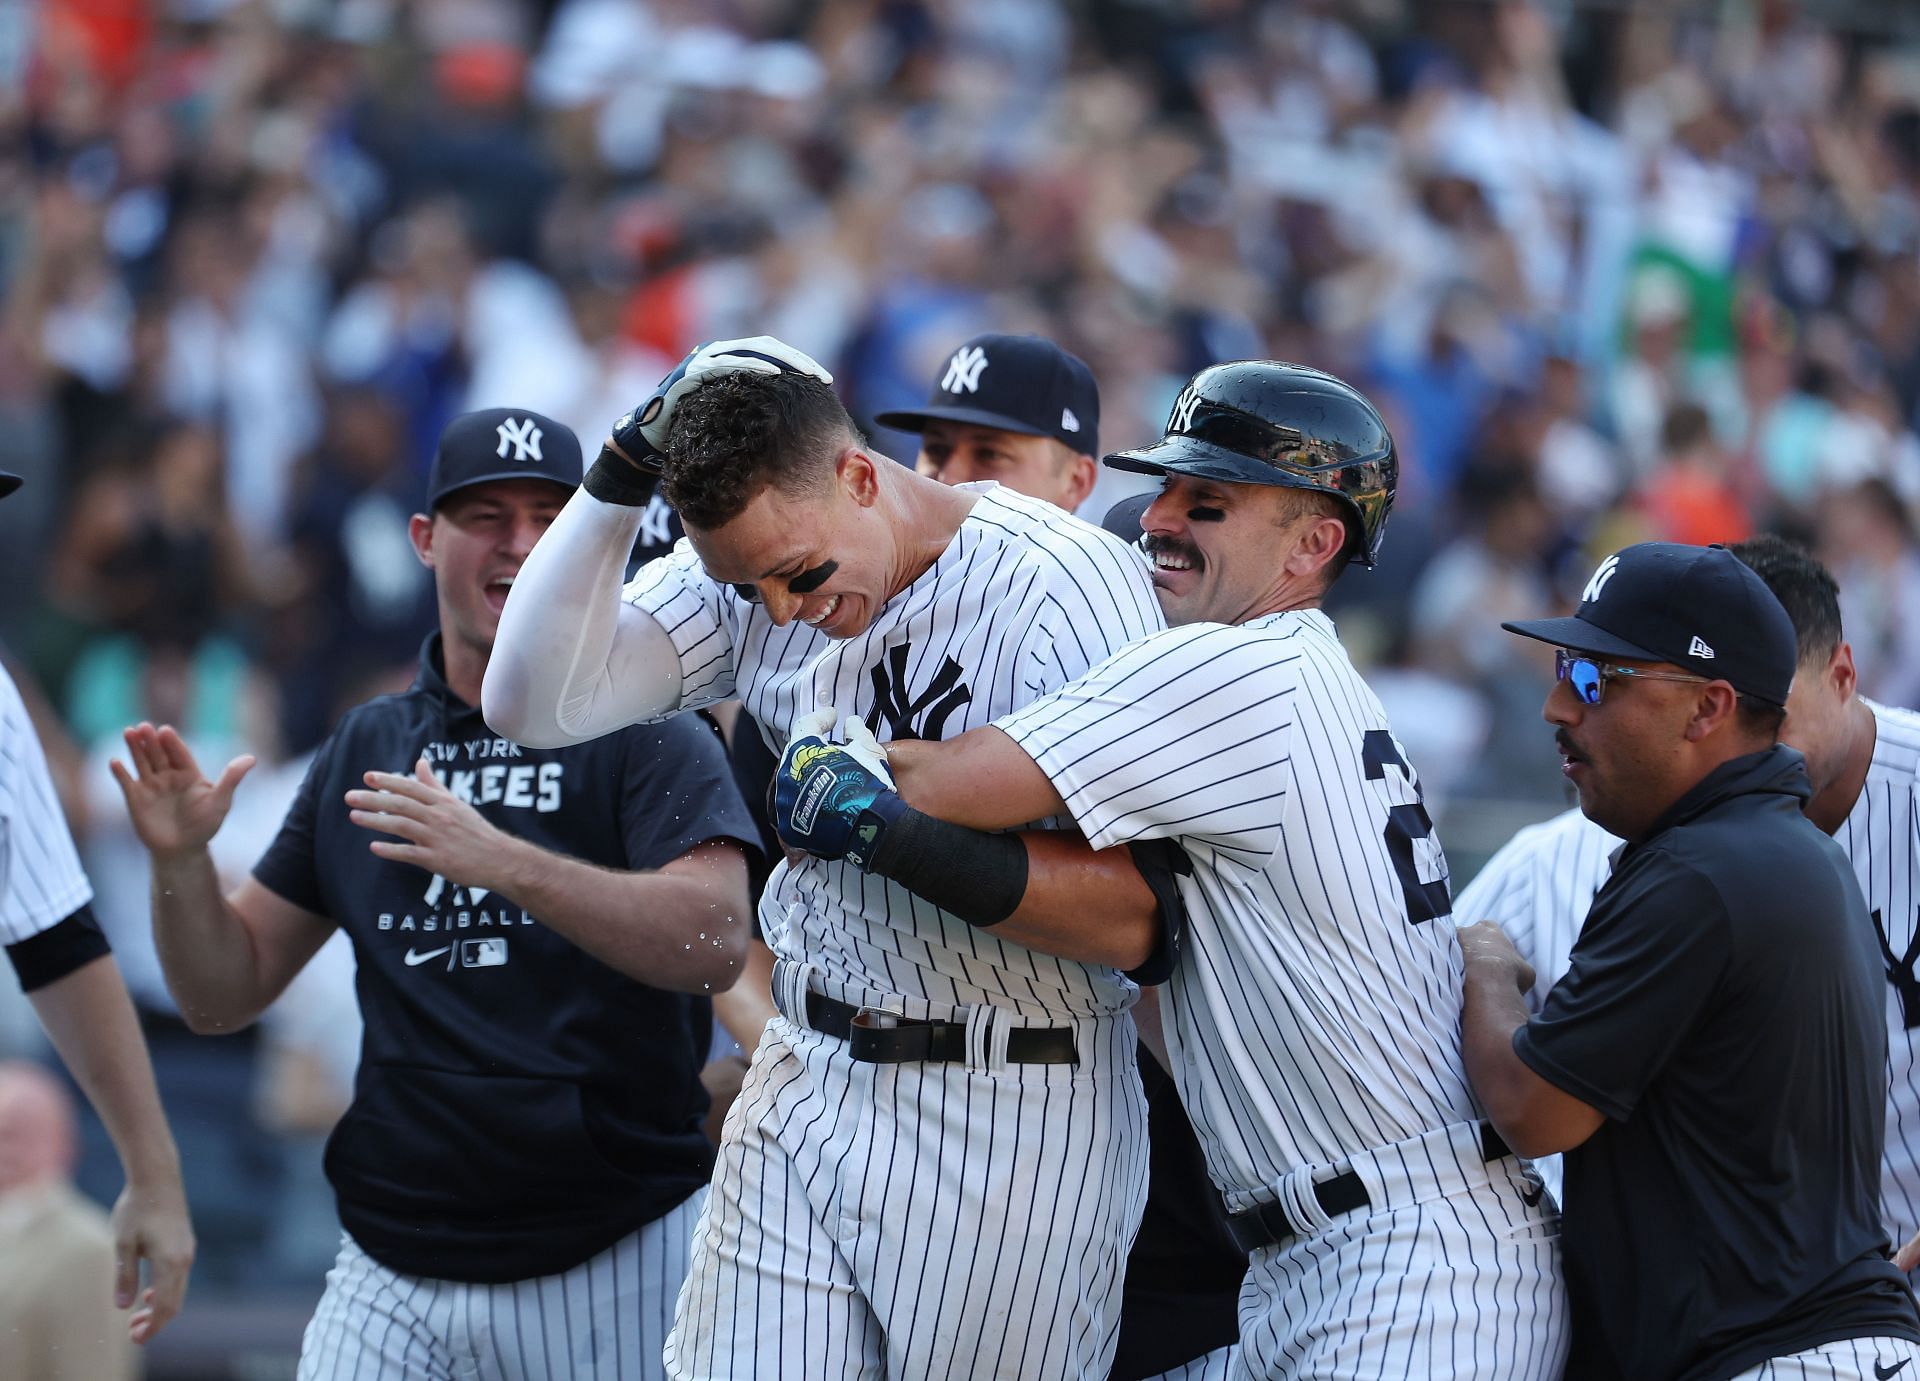 Aaron Judge of the New York Yankees is greeted by his team after hitting a walk-off tenth-inning three-run home run.